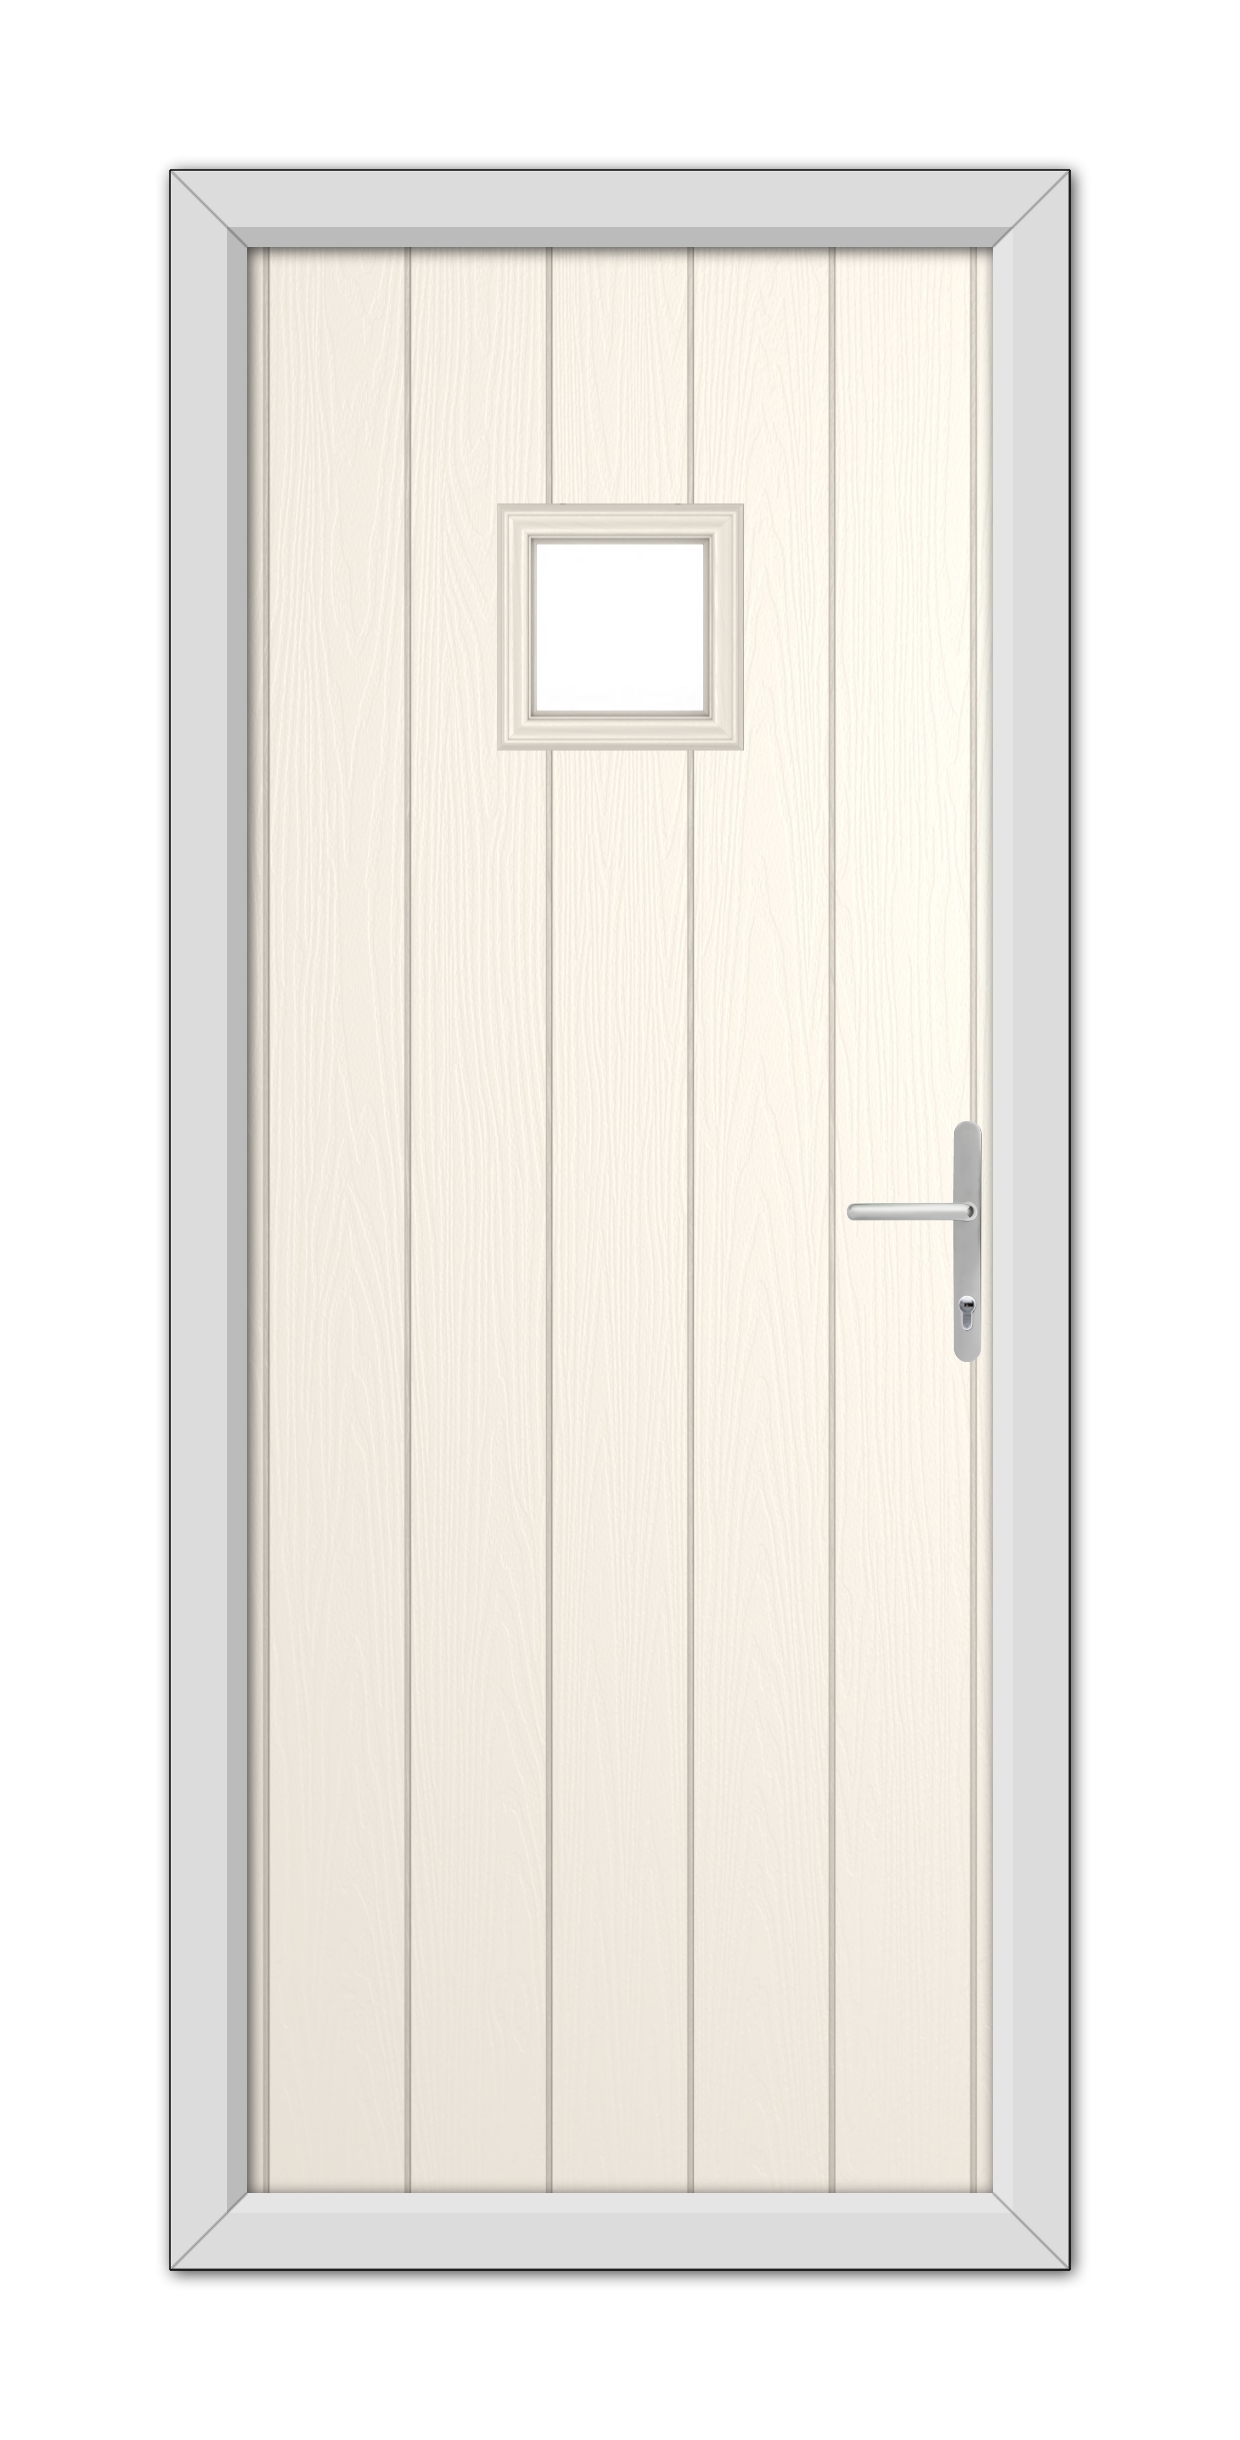 A White Foil Brampton Composite Door 48mm Timber Core with a metal handle, small rectangular window, and a gray frame, viewed from the front.